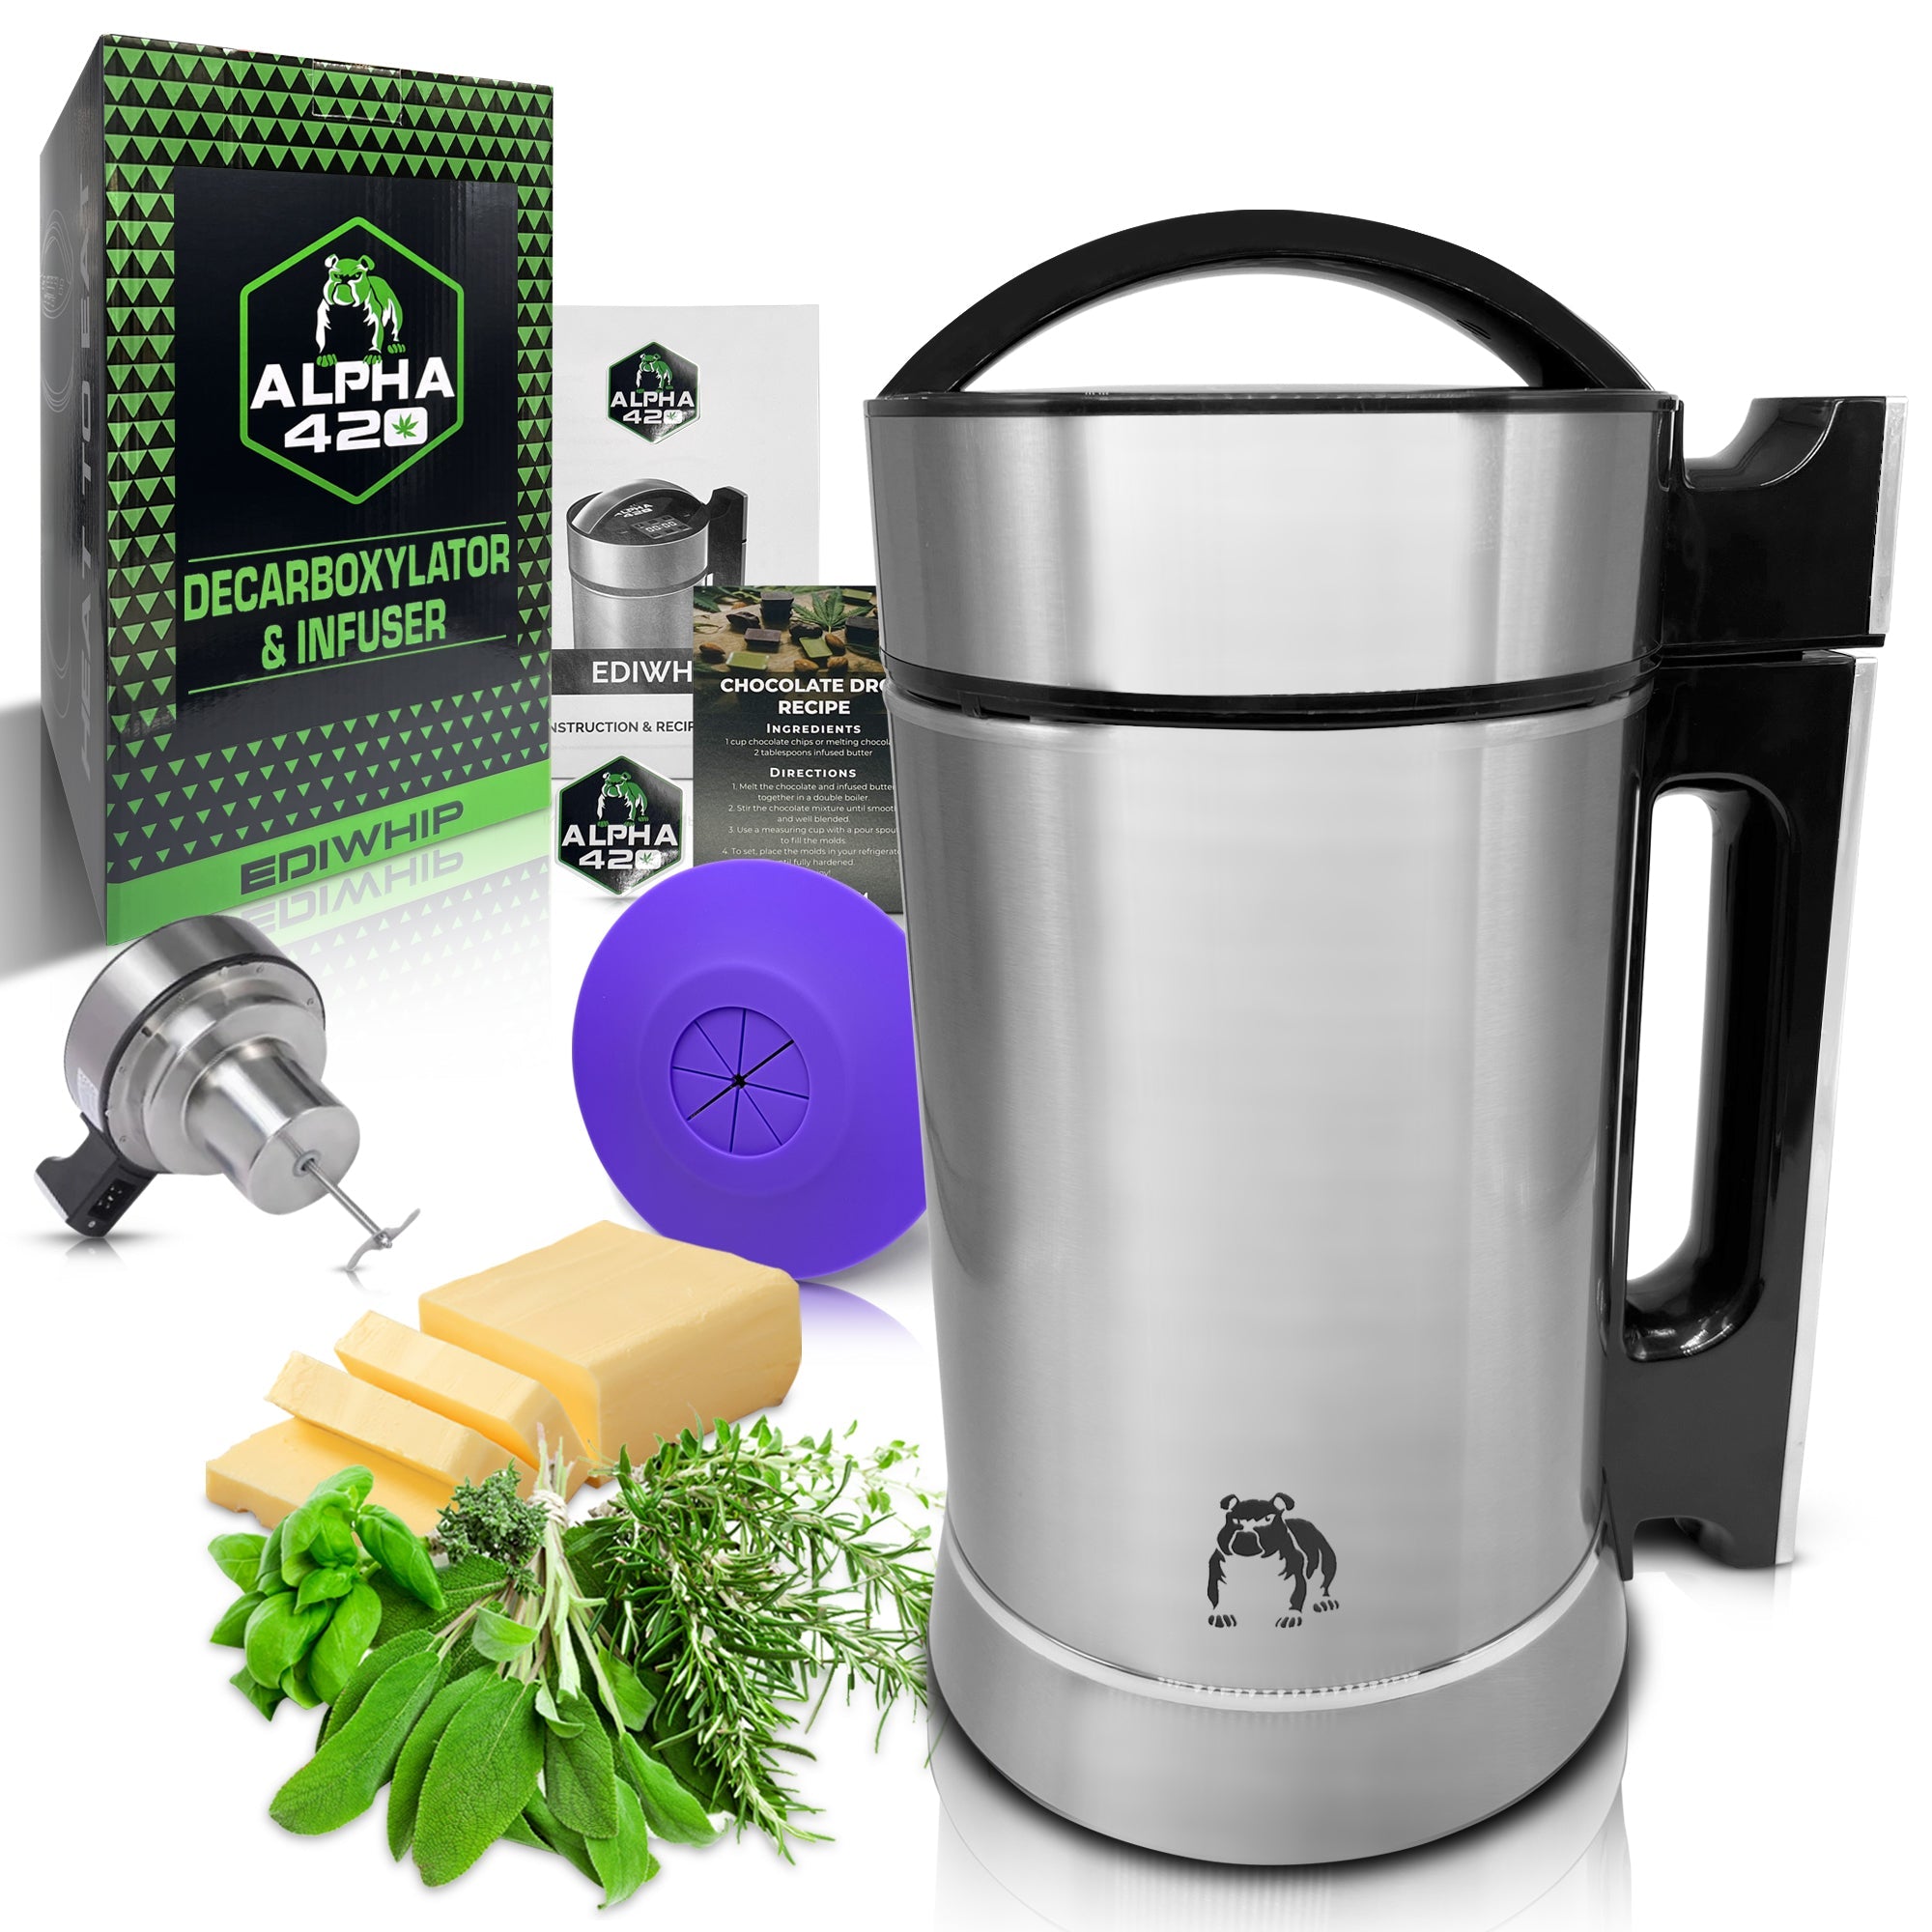 butter maker oil infuser decarboxylator and infuser herb machine maker